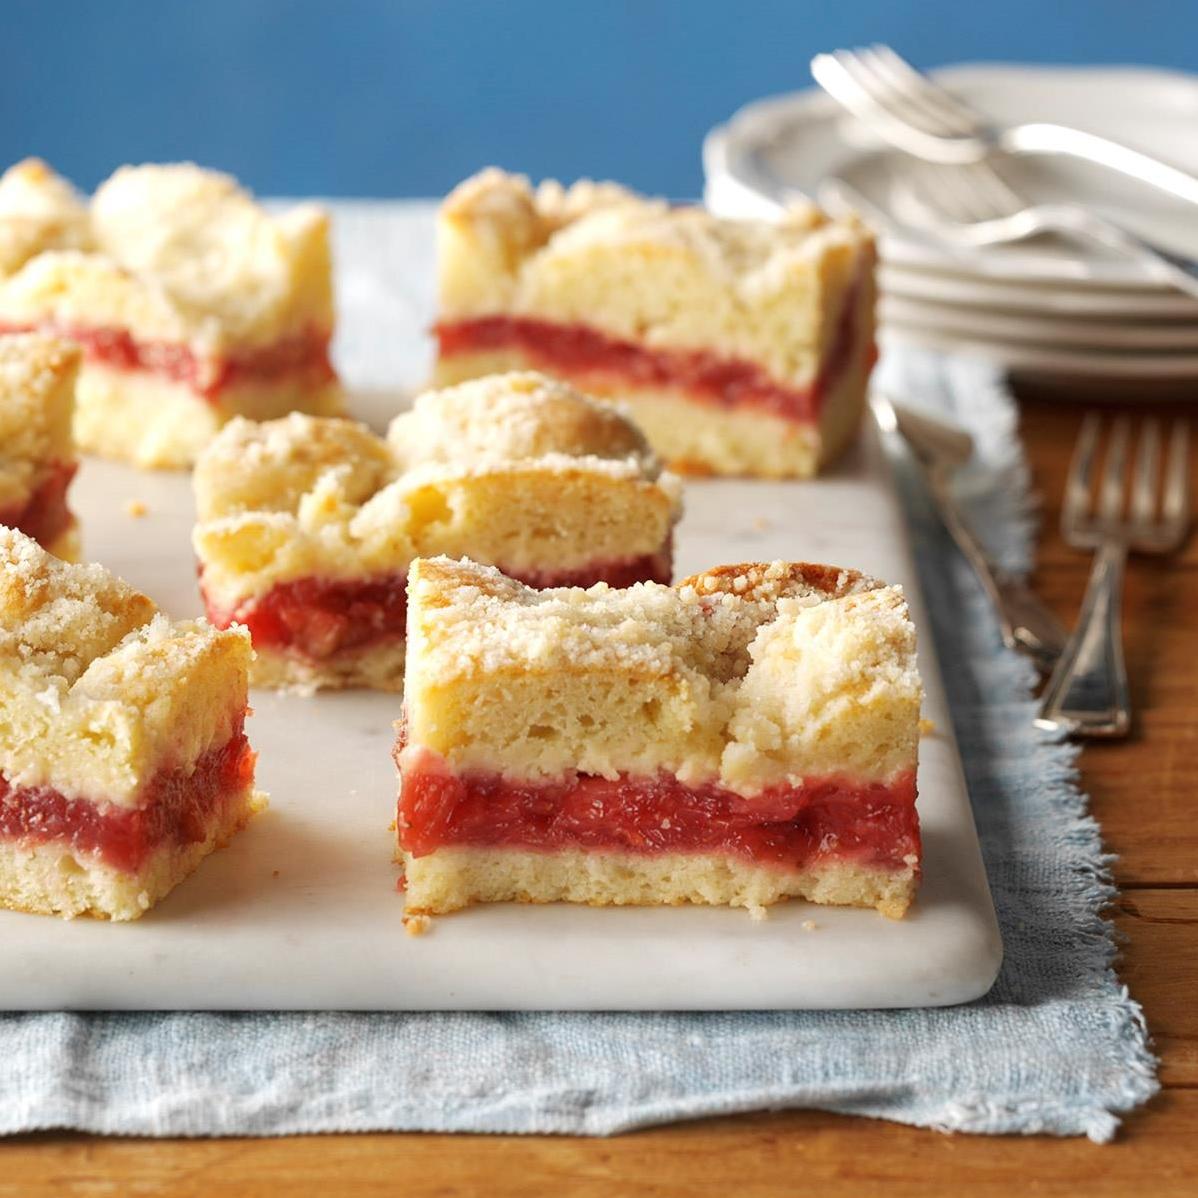  Not a fan of rhubarb? Swap it out for your favorite fruit and enjoy a customized coffee cake.